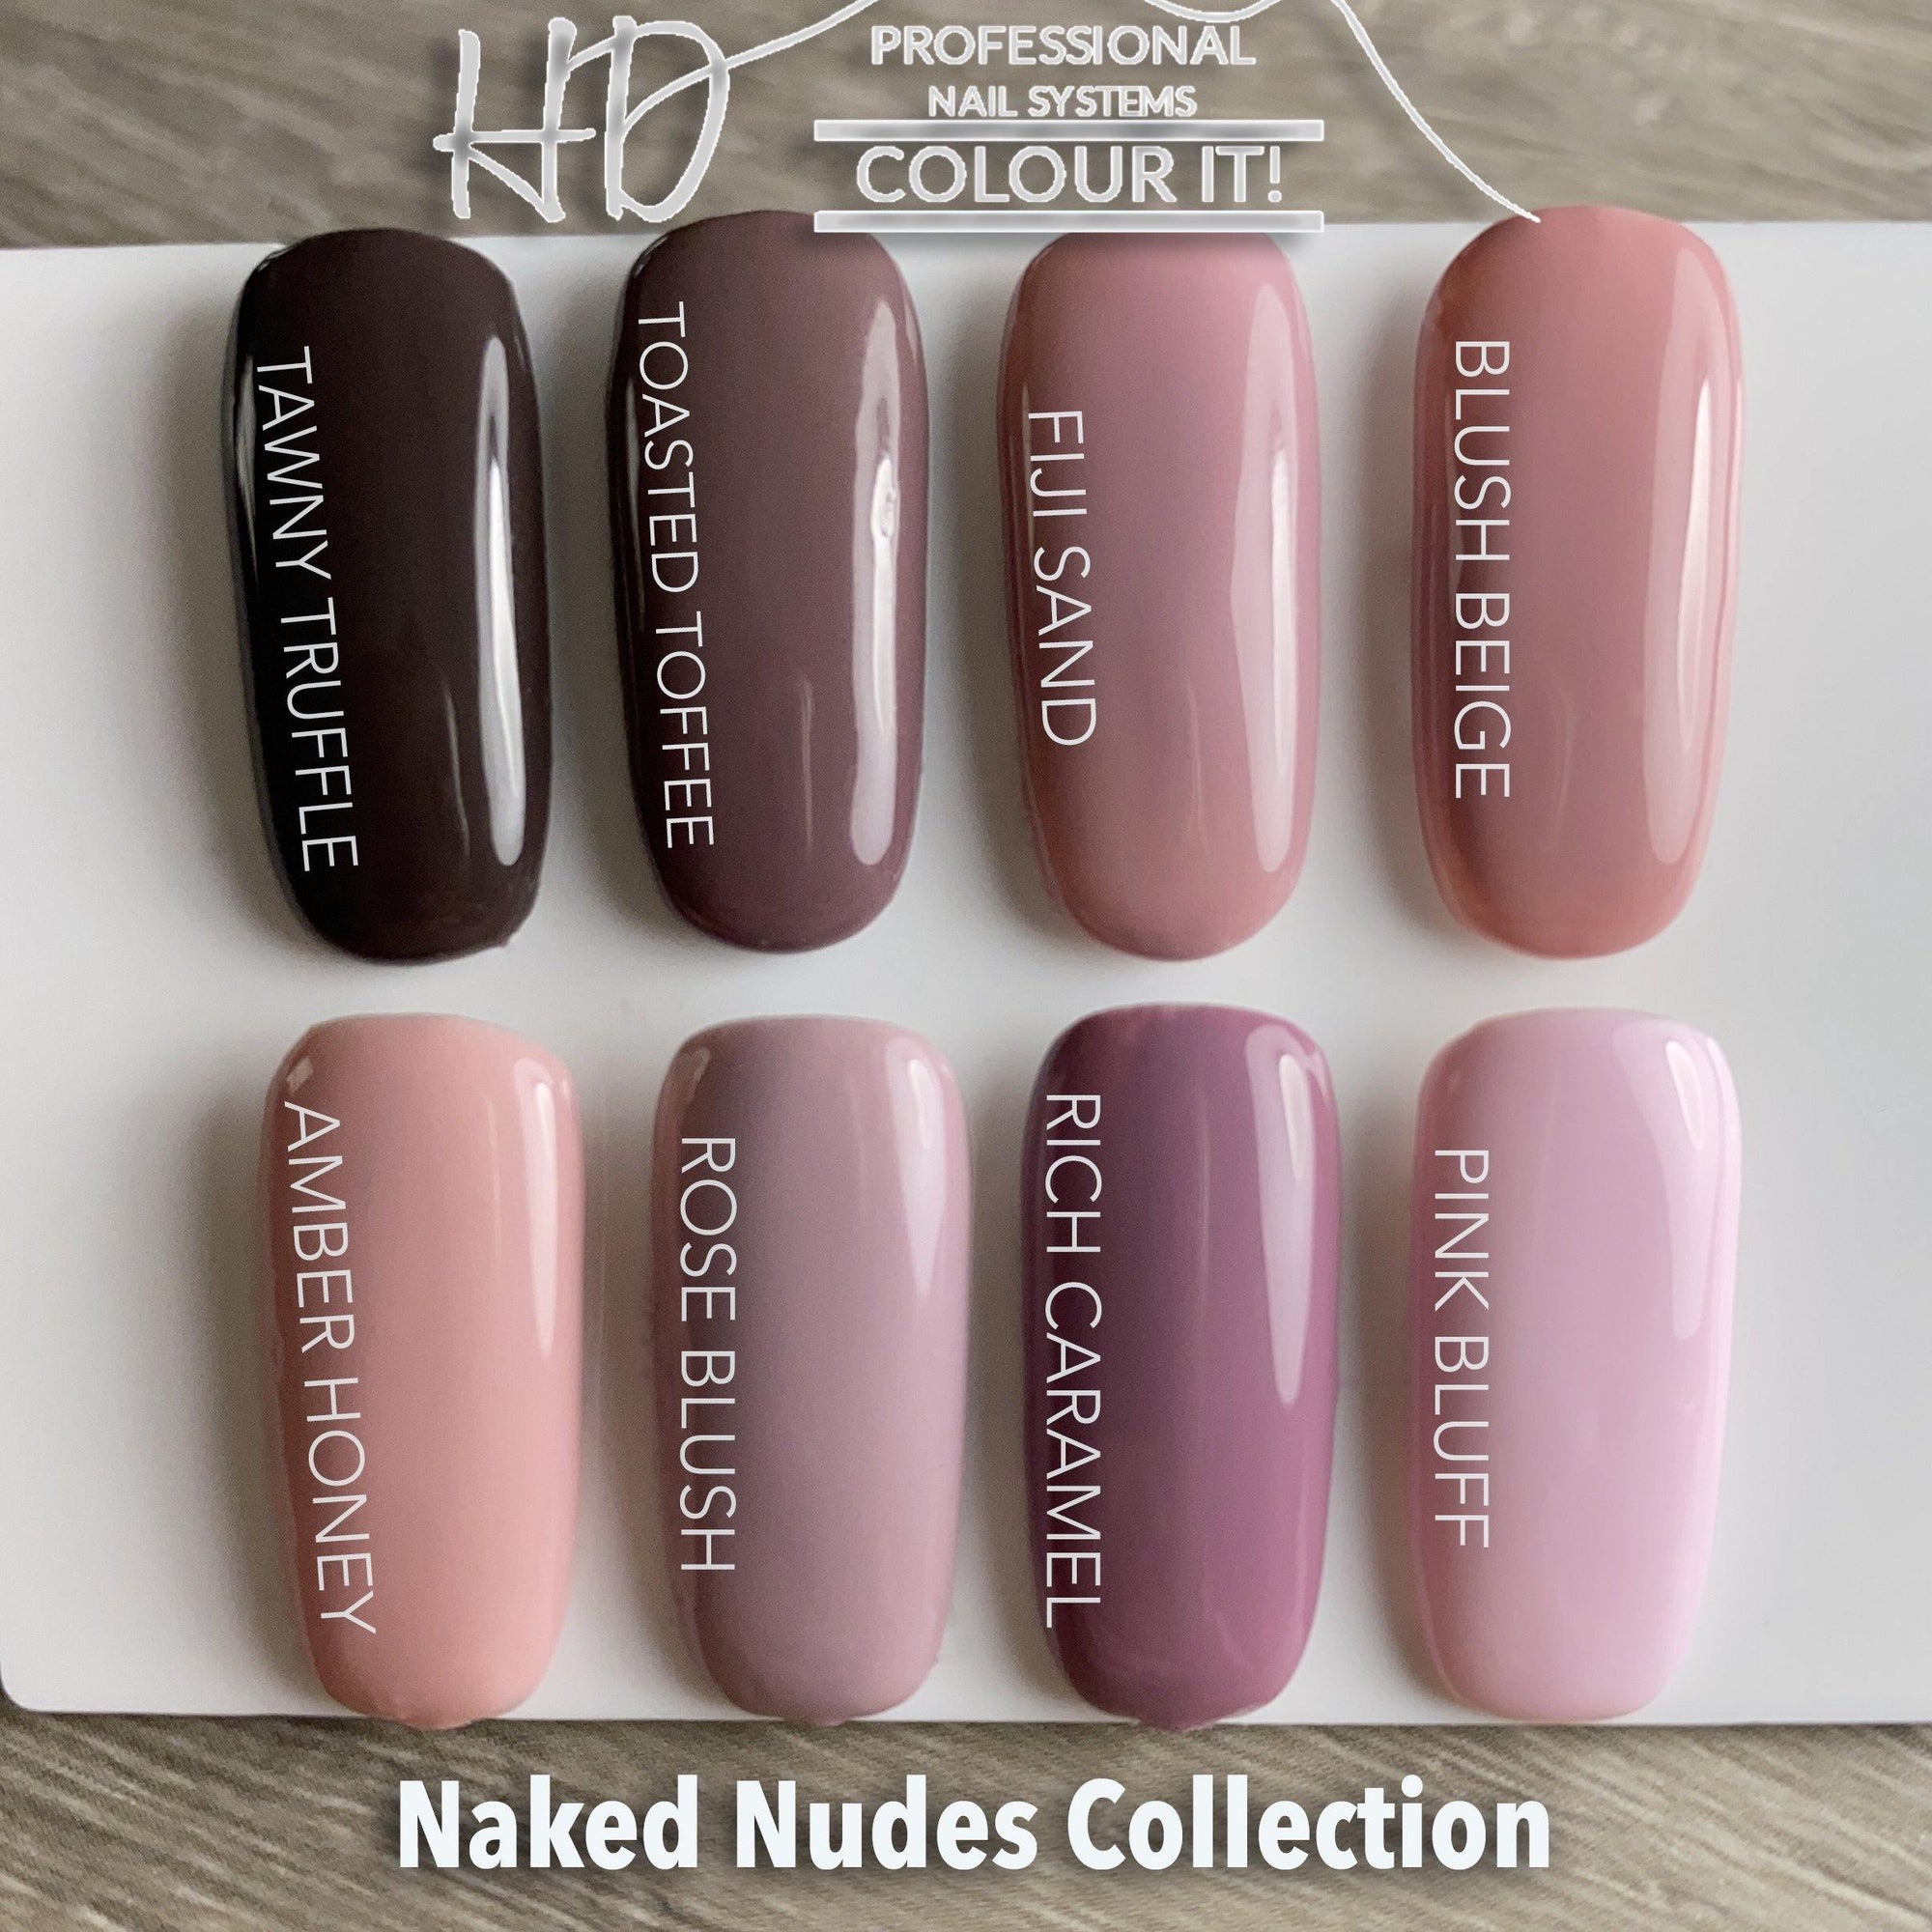 HD Colour It! Naked Nudes Collection (all 8 colors 15ml) - Gel Essentialz